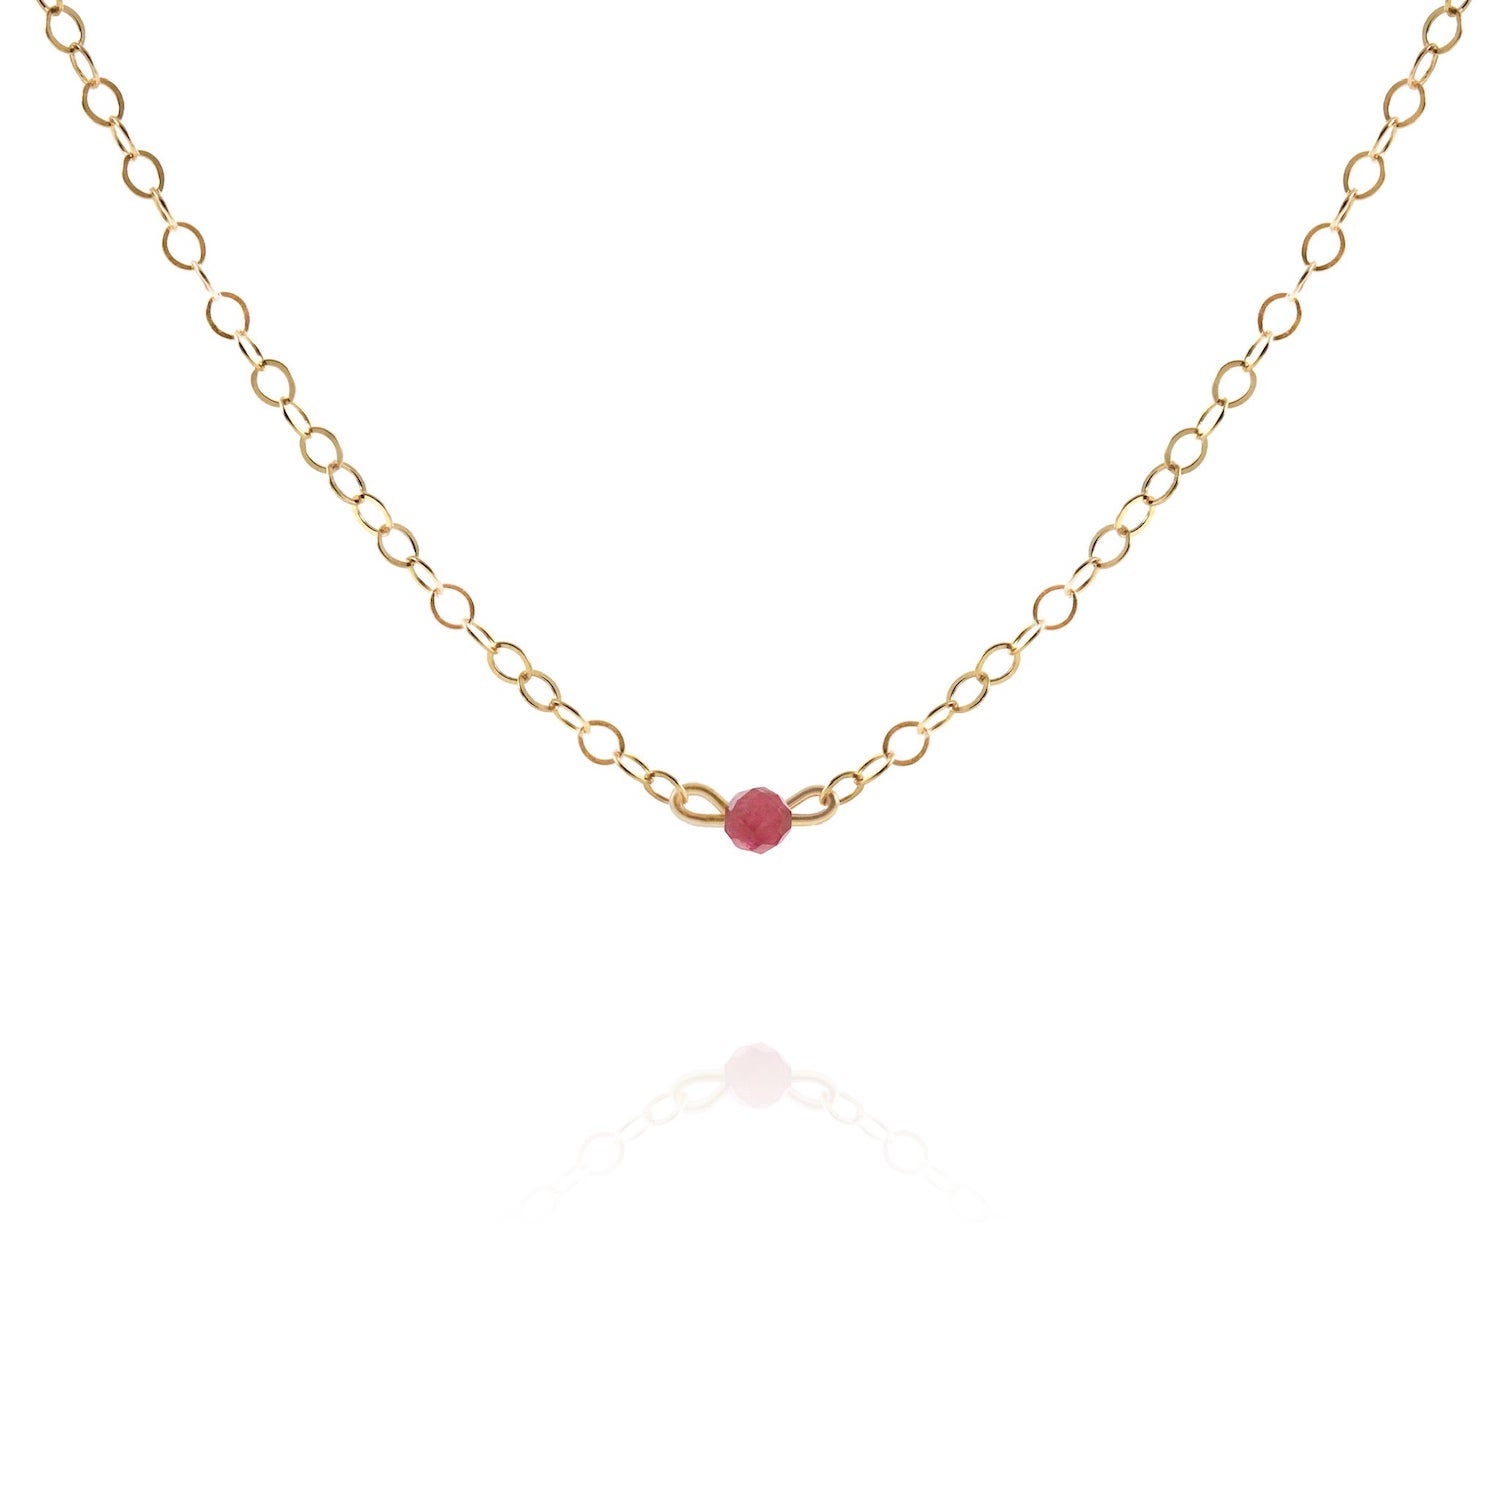 gold choker necklace with dainty ruby gemstone